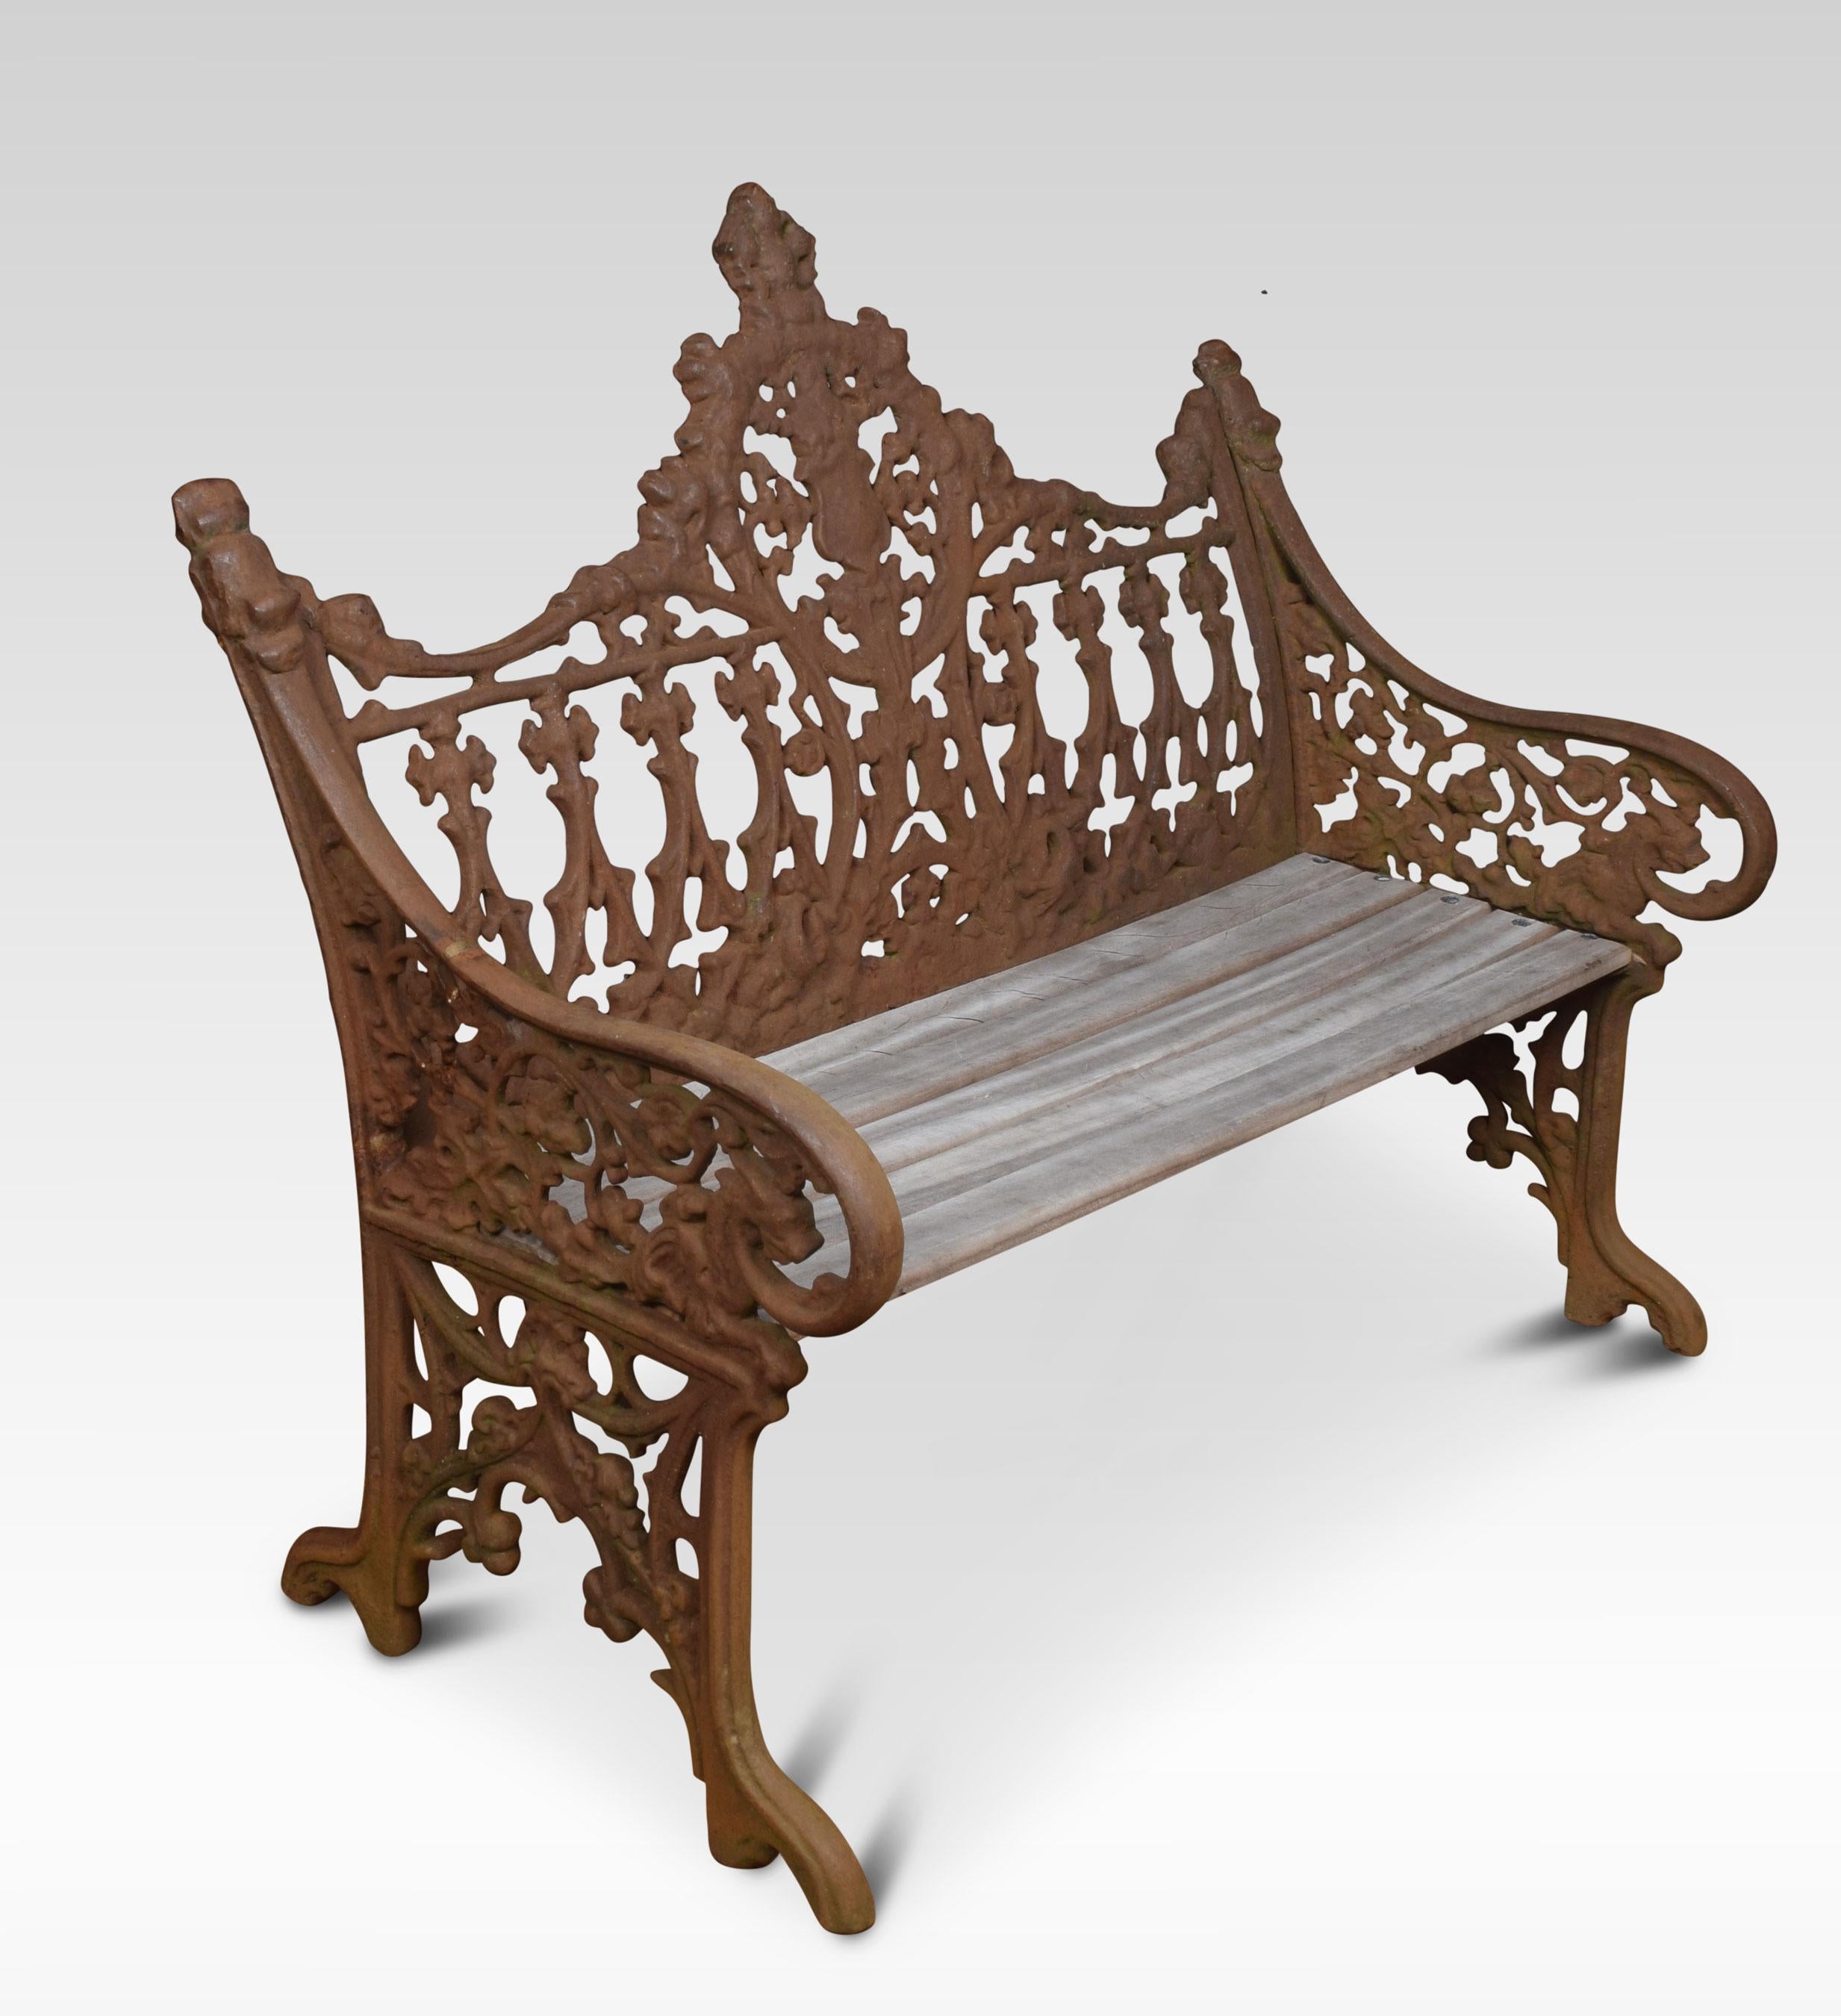 Set of cast iron garden seats, including a two-seater bench and two single chairs, each with shaped pierced decorated backs, scroll arms and replaced grid type seats. All raised up on shaped legs.
Dimensions
Two seater
Height 37 inches height to